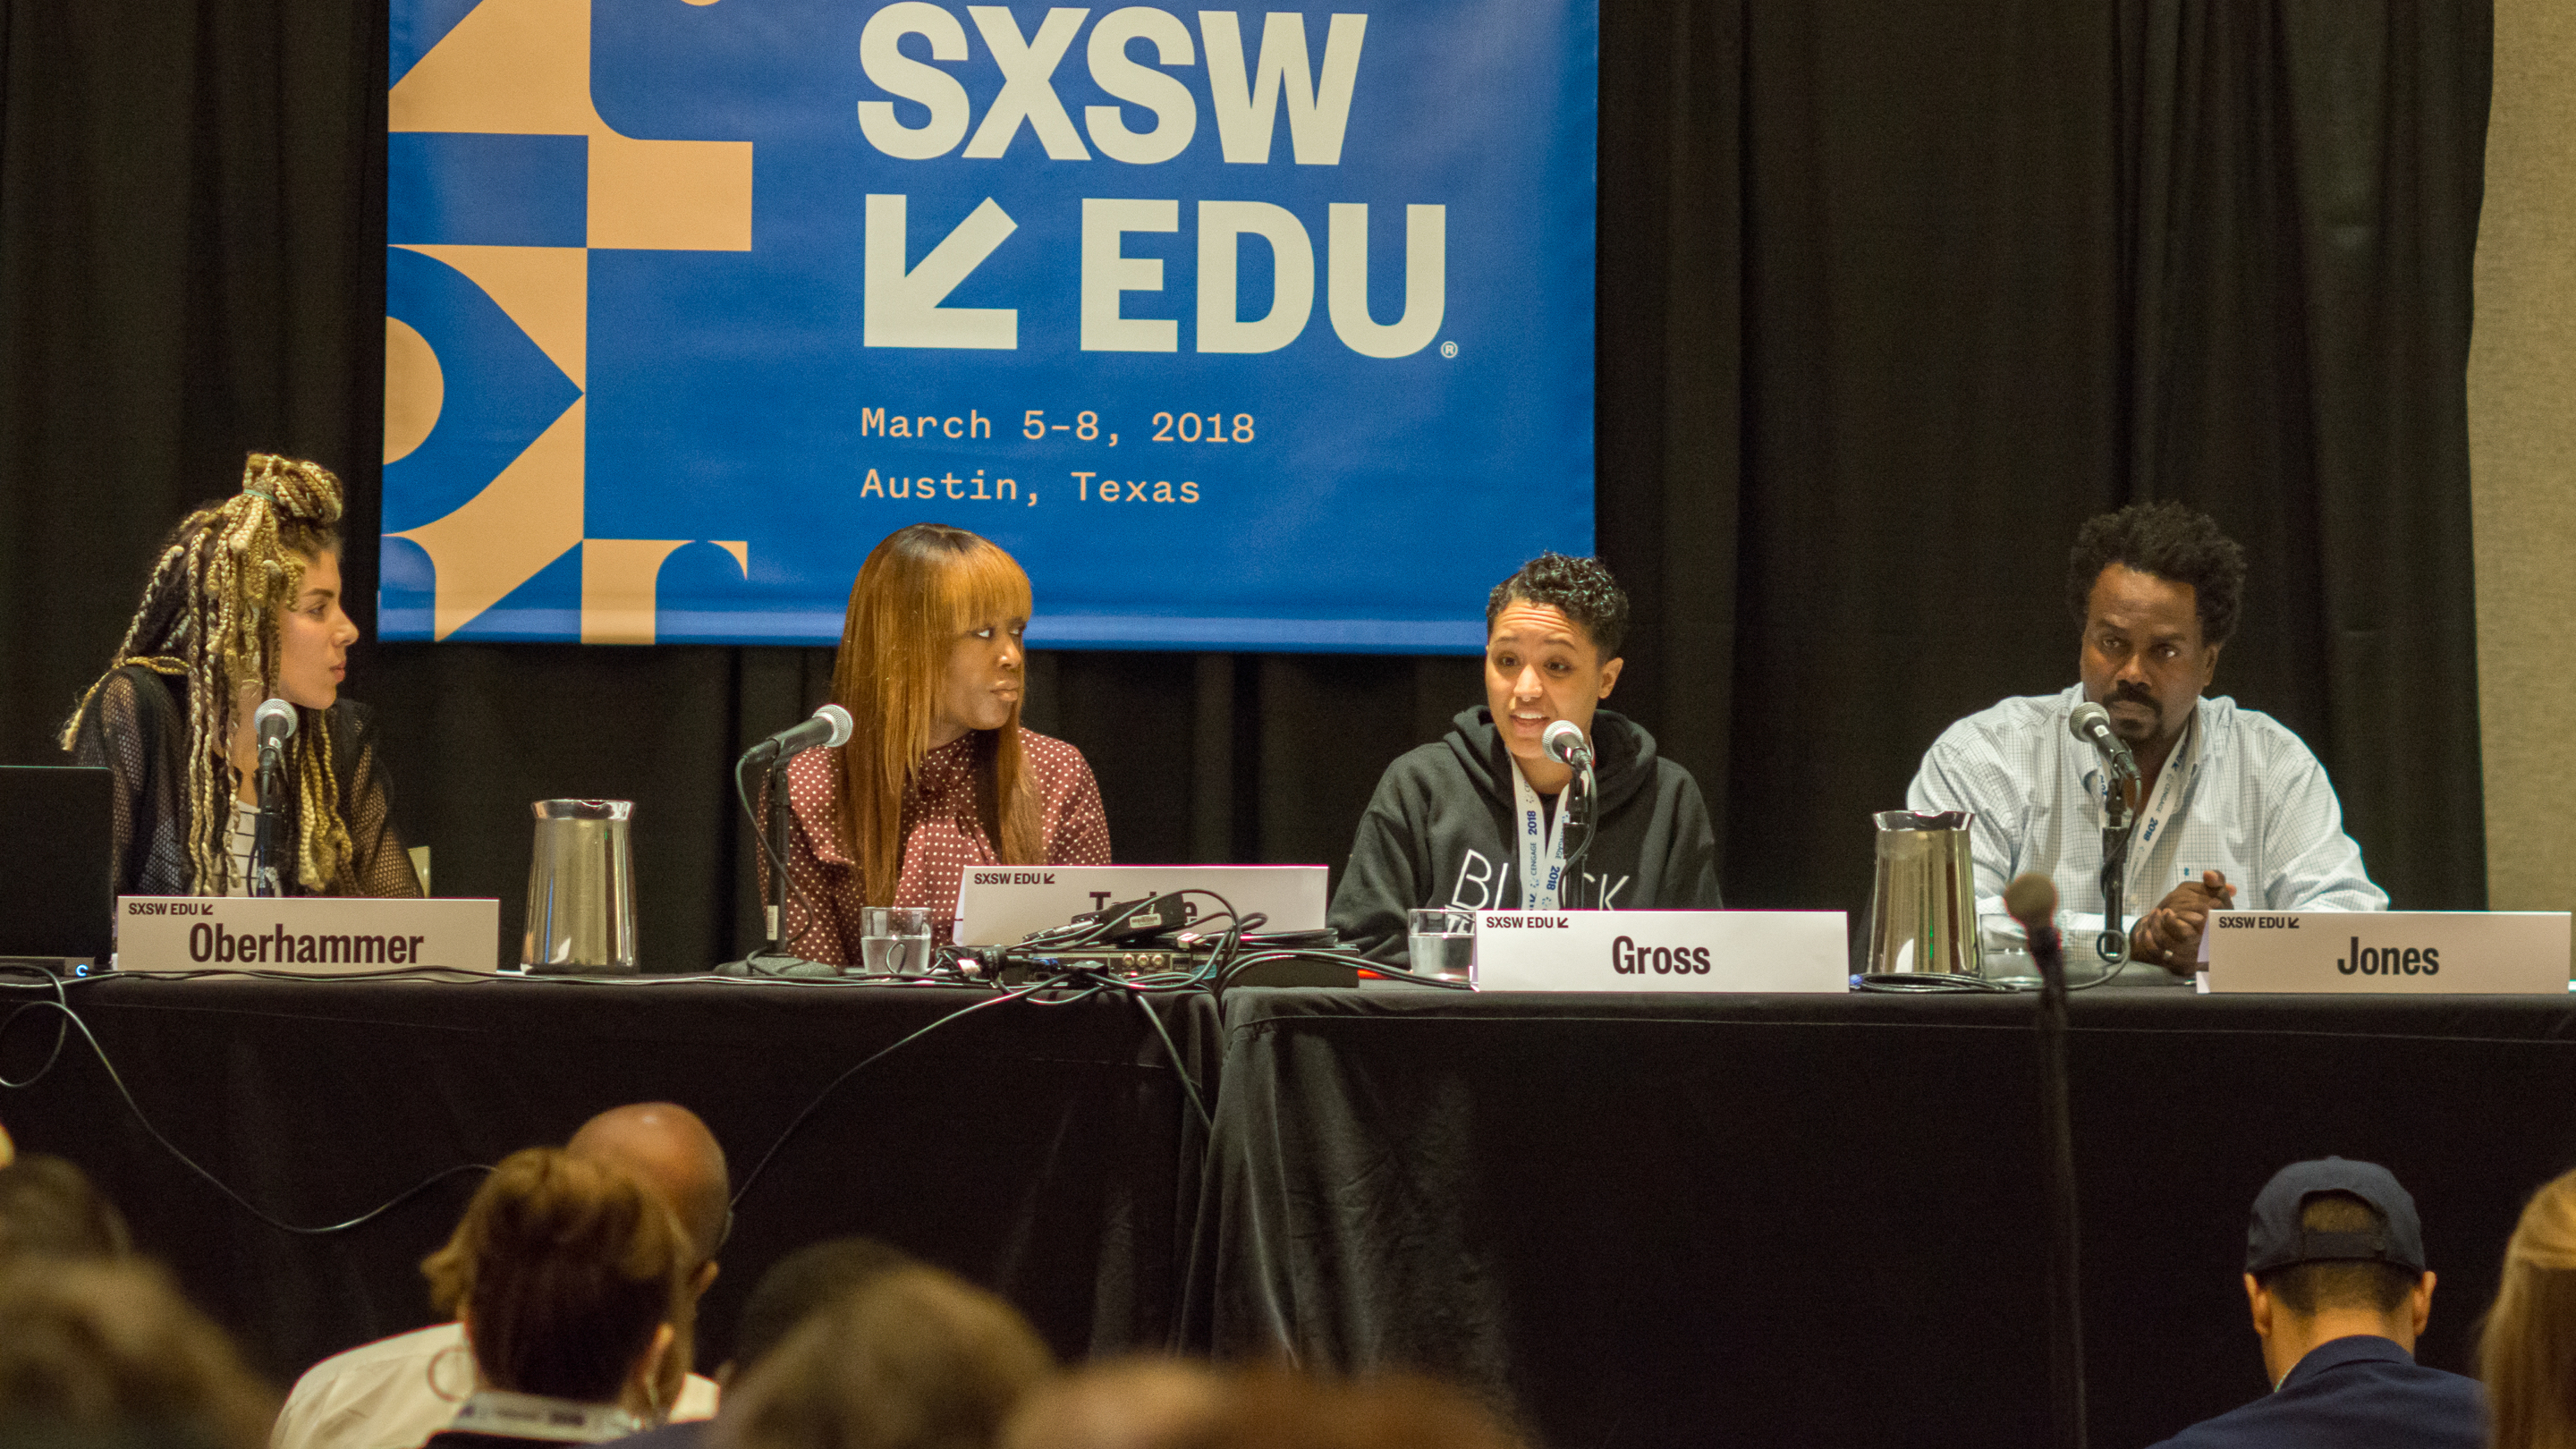 SXSW EDU 2018 panel, Let's Teach About Race, featuring Akiea Gross (Equitable Schools), Timothy Jones (HipHopEd), Tierney Oberhammer (Flocabulary), and Yvonne Tackie (Friendship Public Charter Schools). 